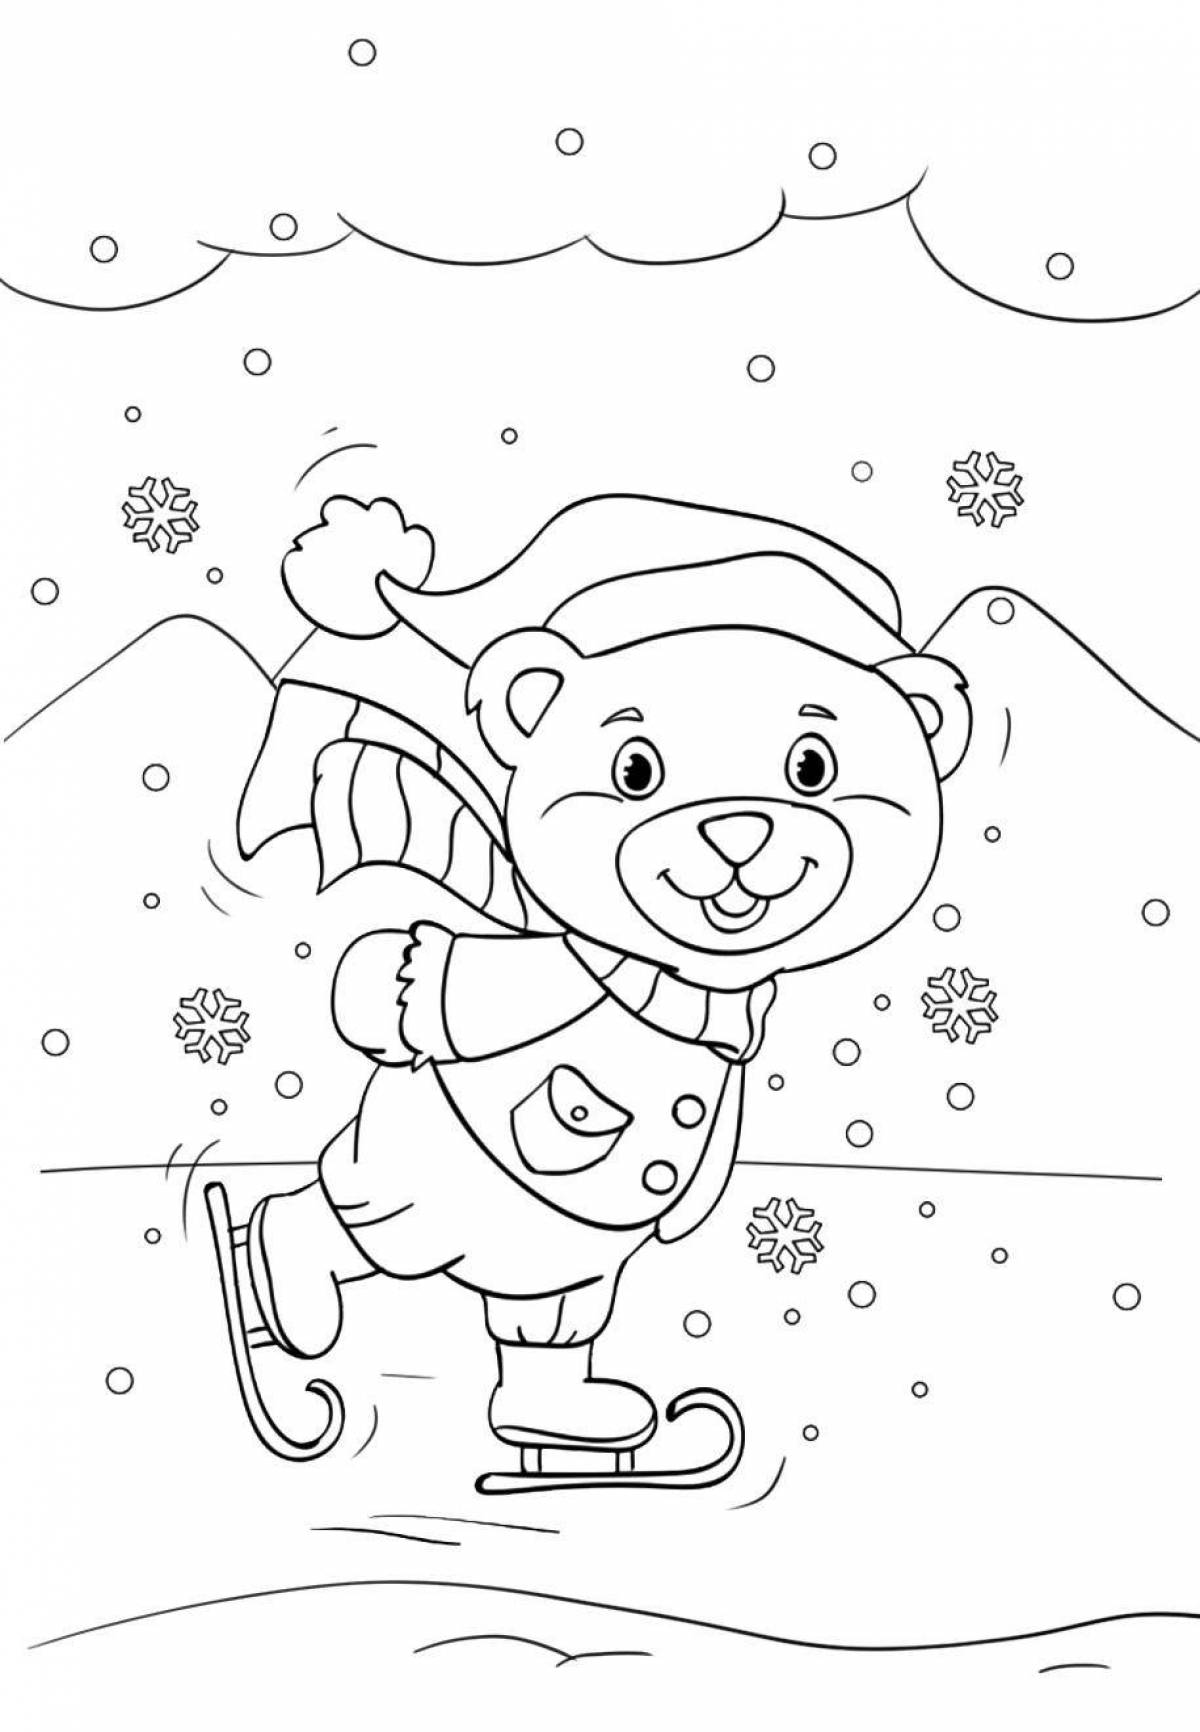 Coloring book shining ice rink